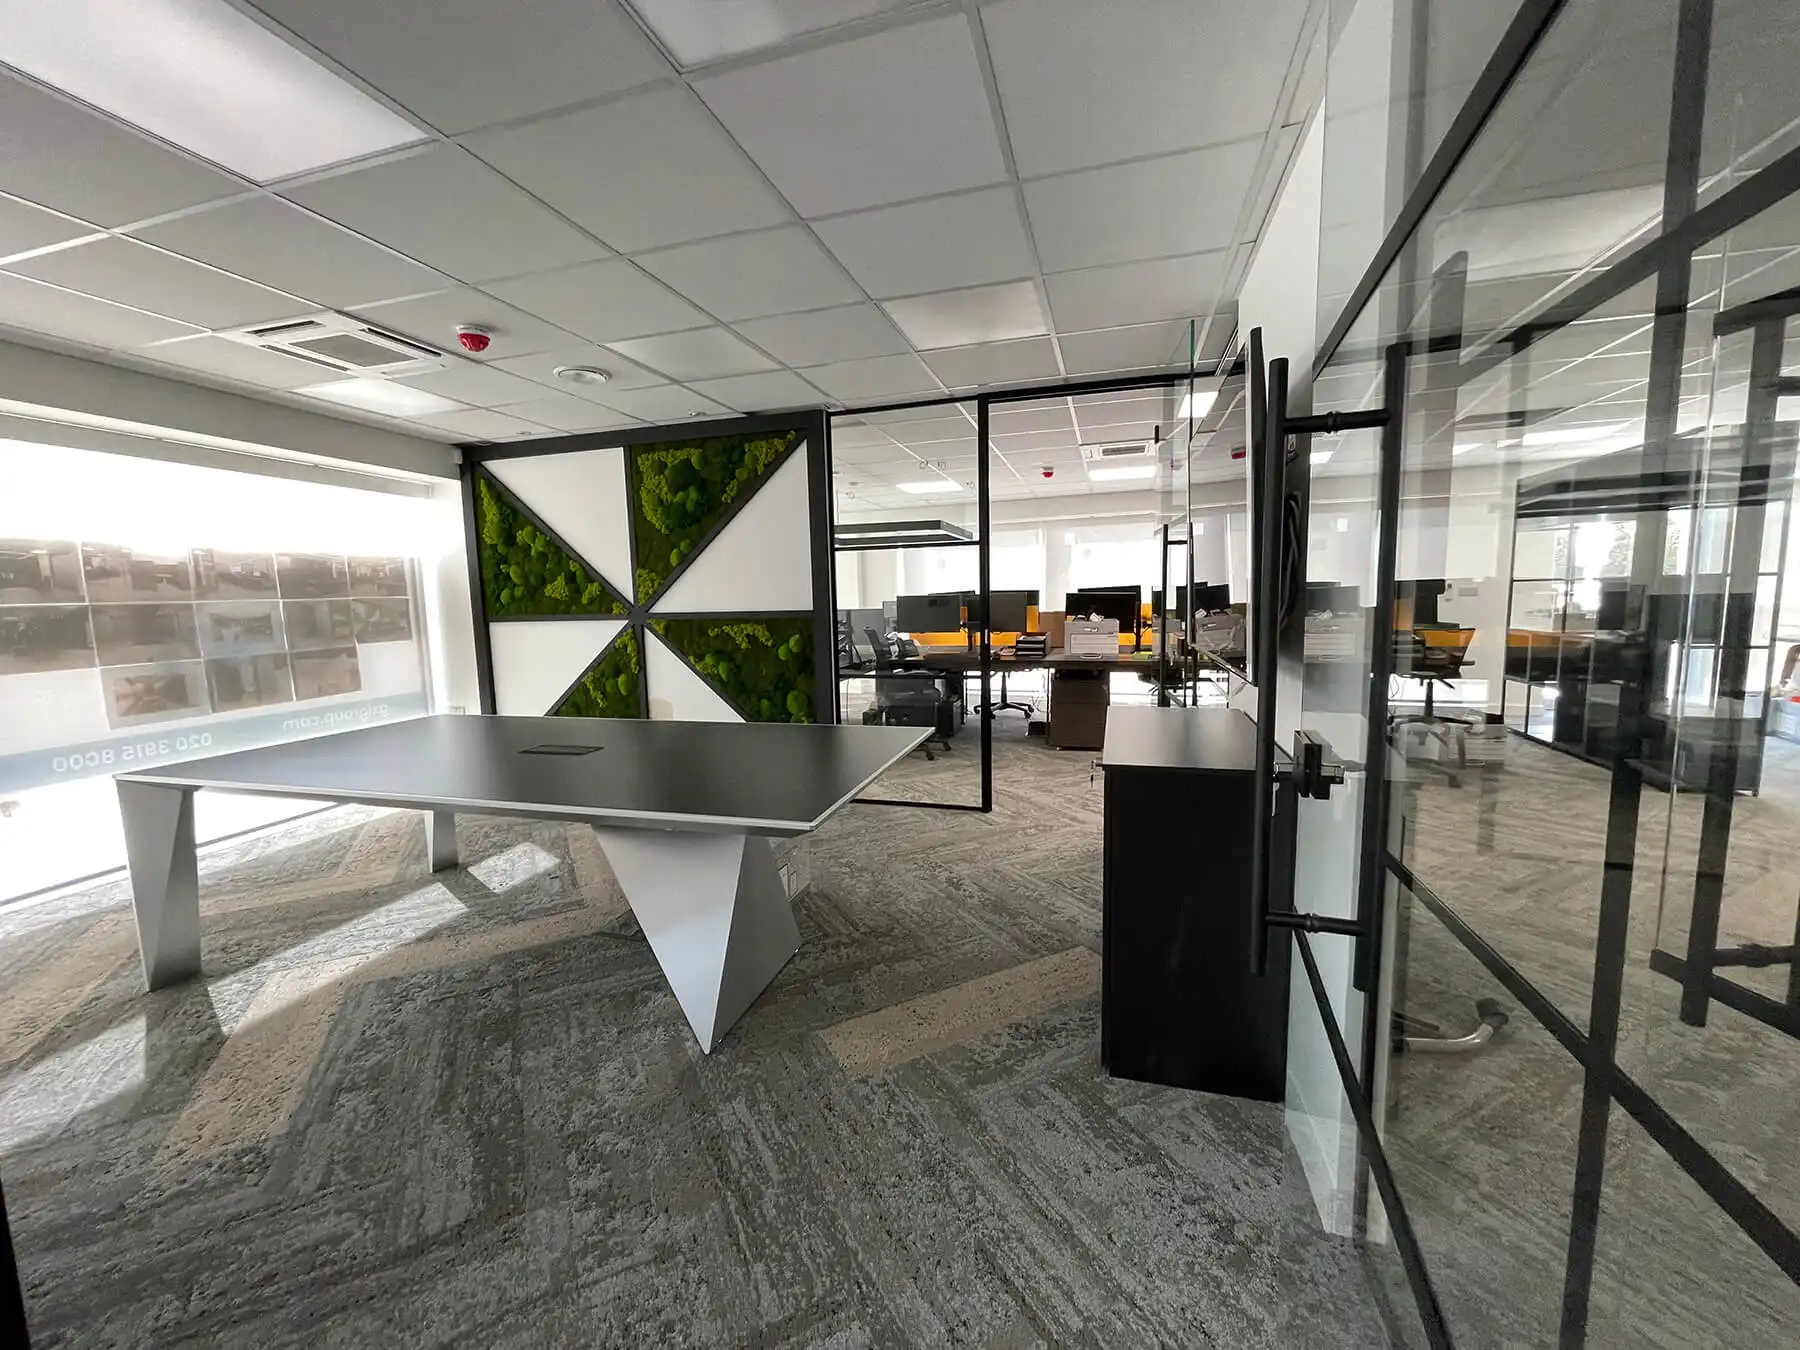 Meeting room and co working space divided with black frmaed glass partitions